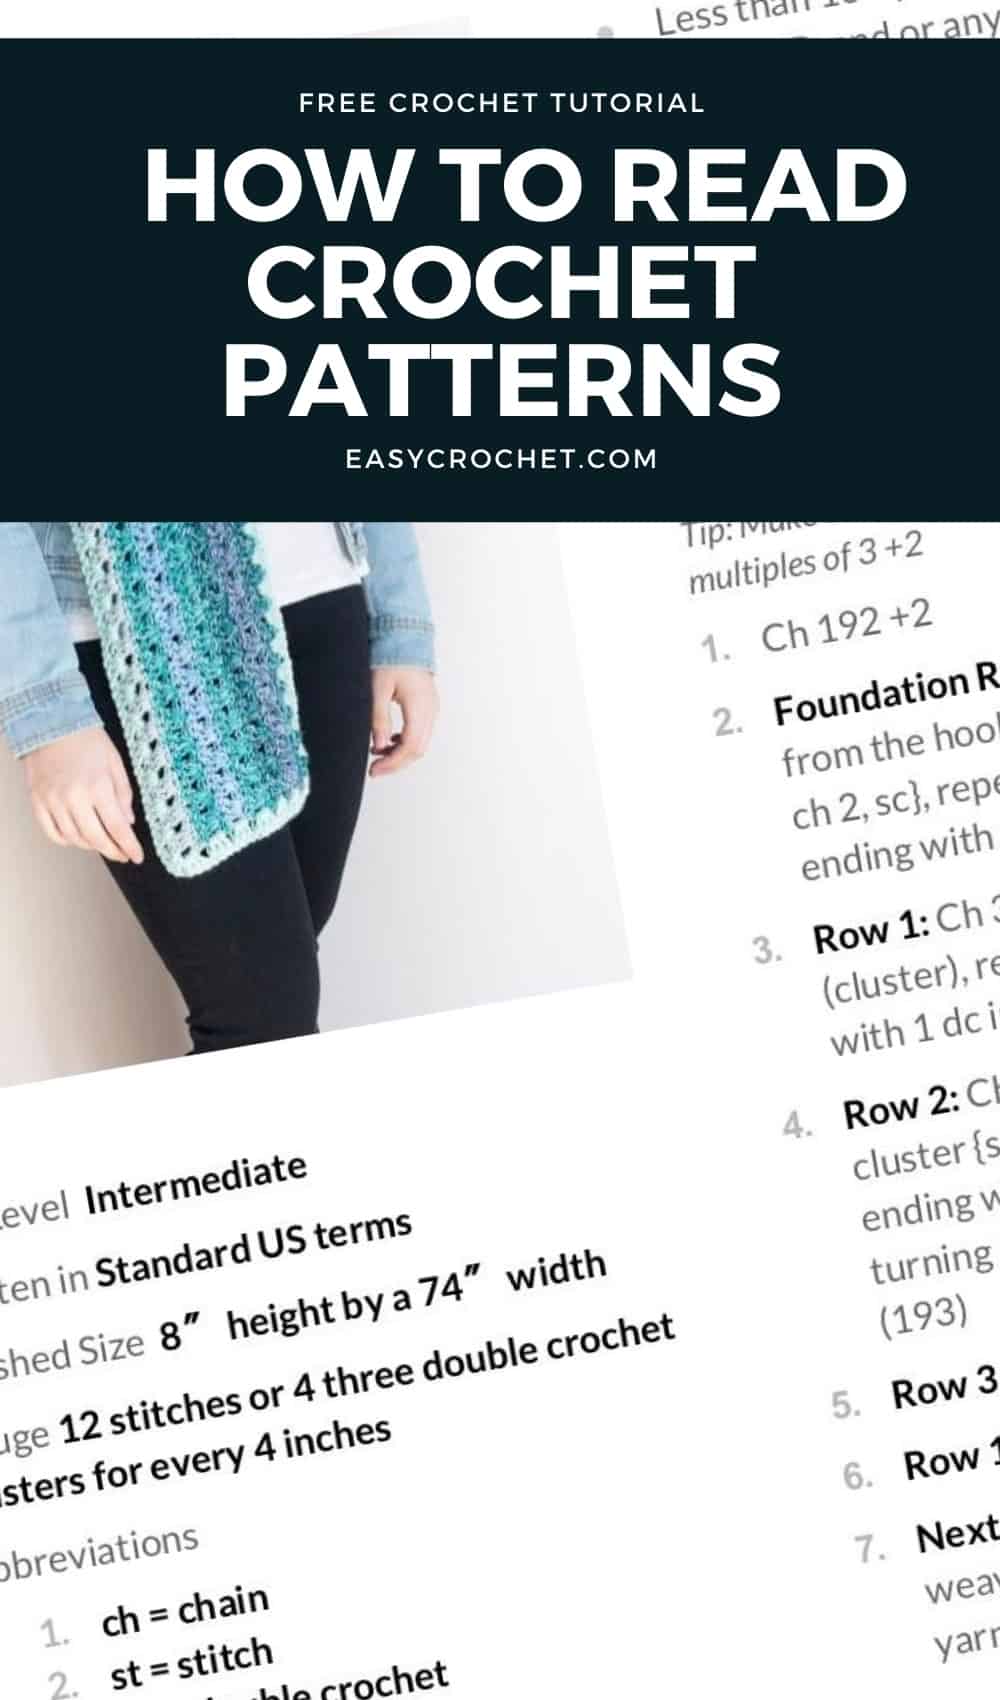 How to Read Crochet Patterns: A Step-by-Step Guide for Beginners